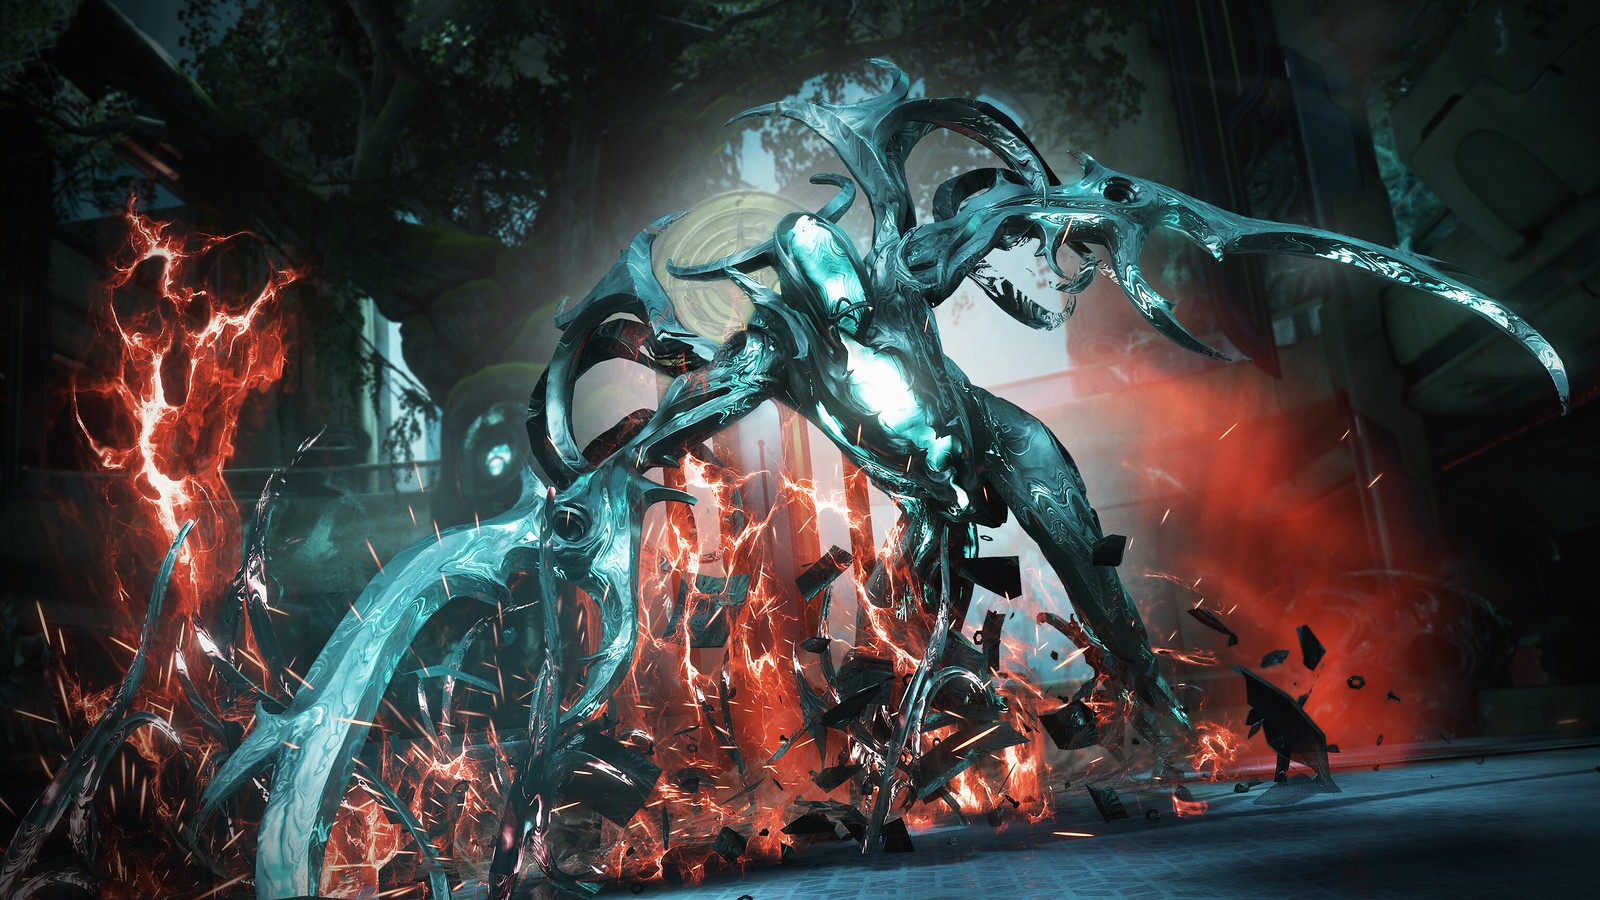 A Sneak Peek Of Warframe's Void Angels Enemy, Available April 27 11